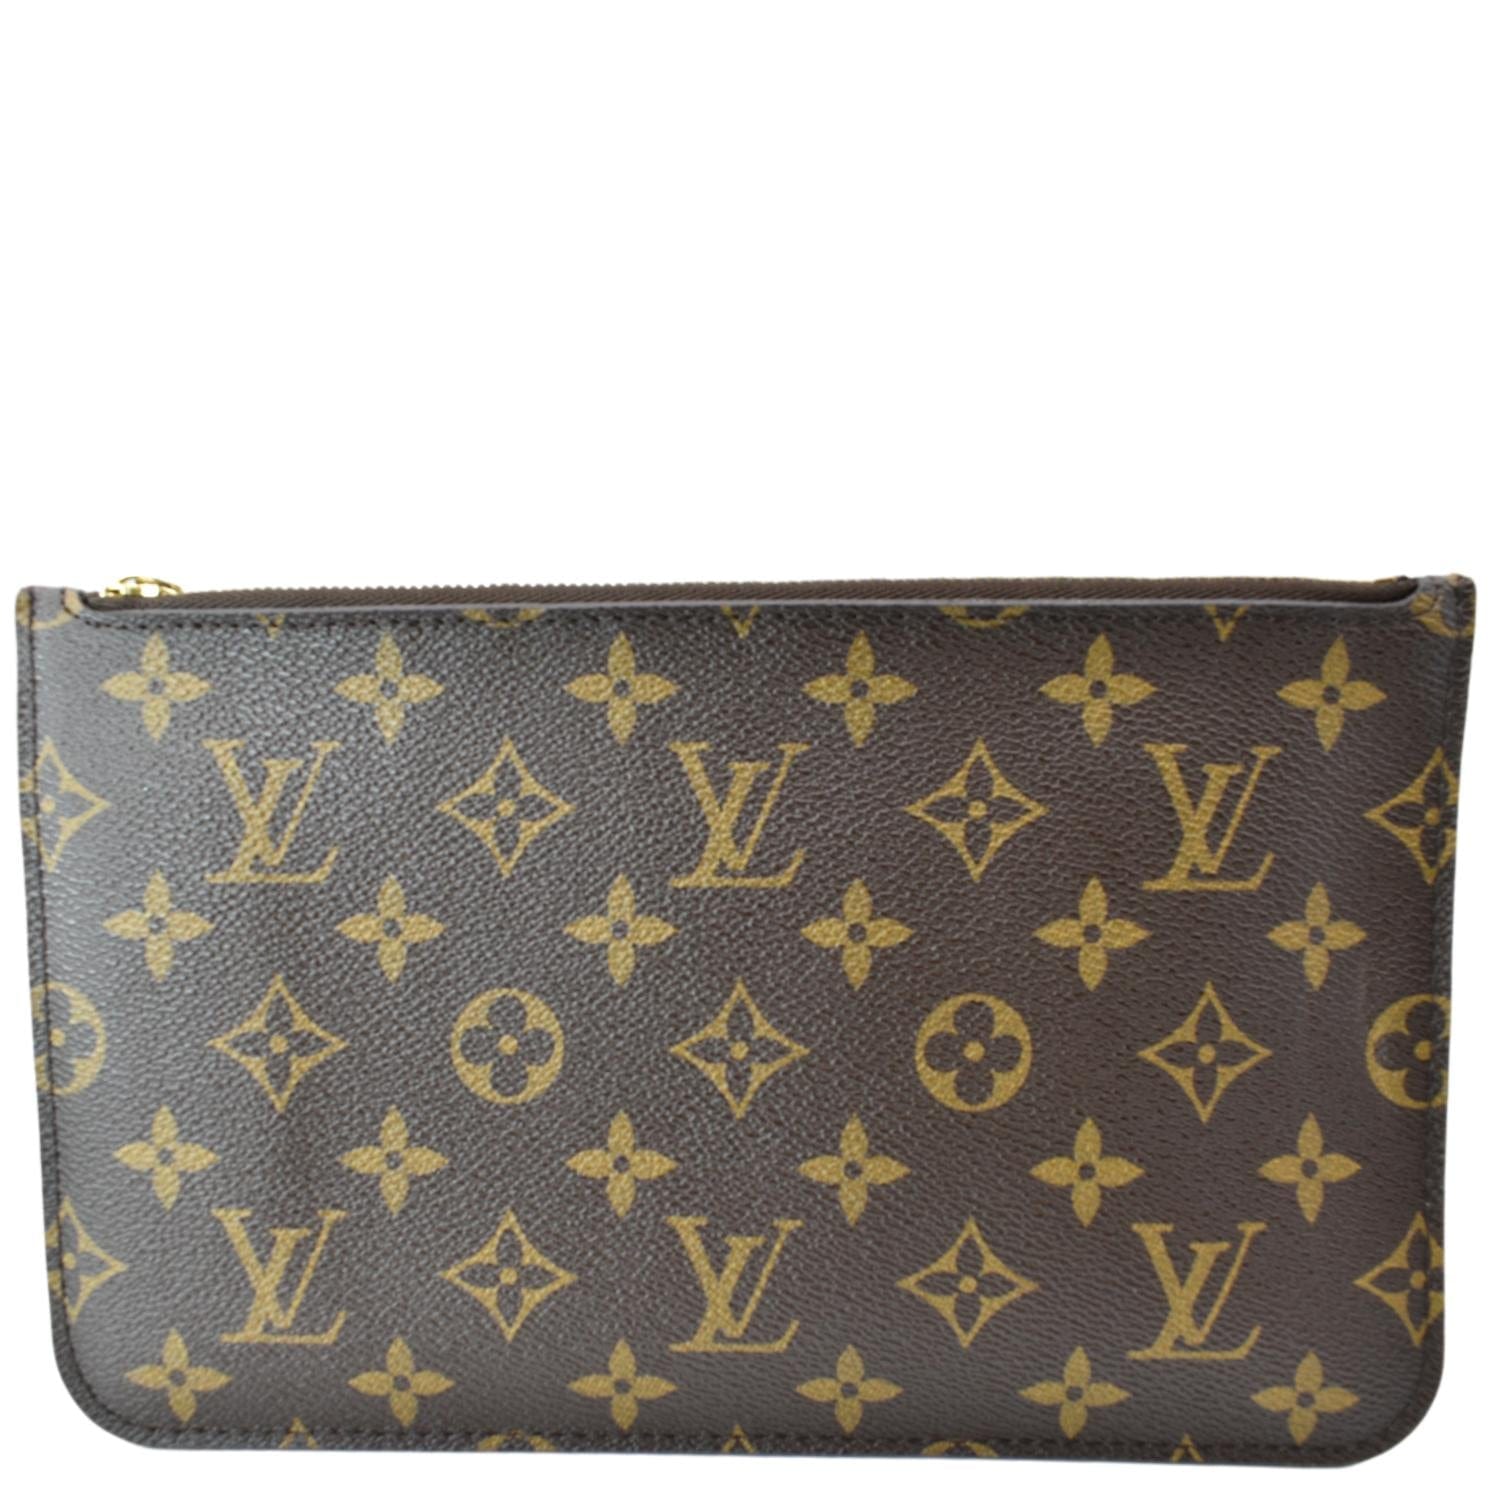 SOLD) 💜💜💜. LV Neverfull Pochette in Monogram w/Beige lining Brand New DM  for pricing We Get The Good Stuff!